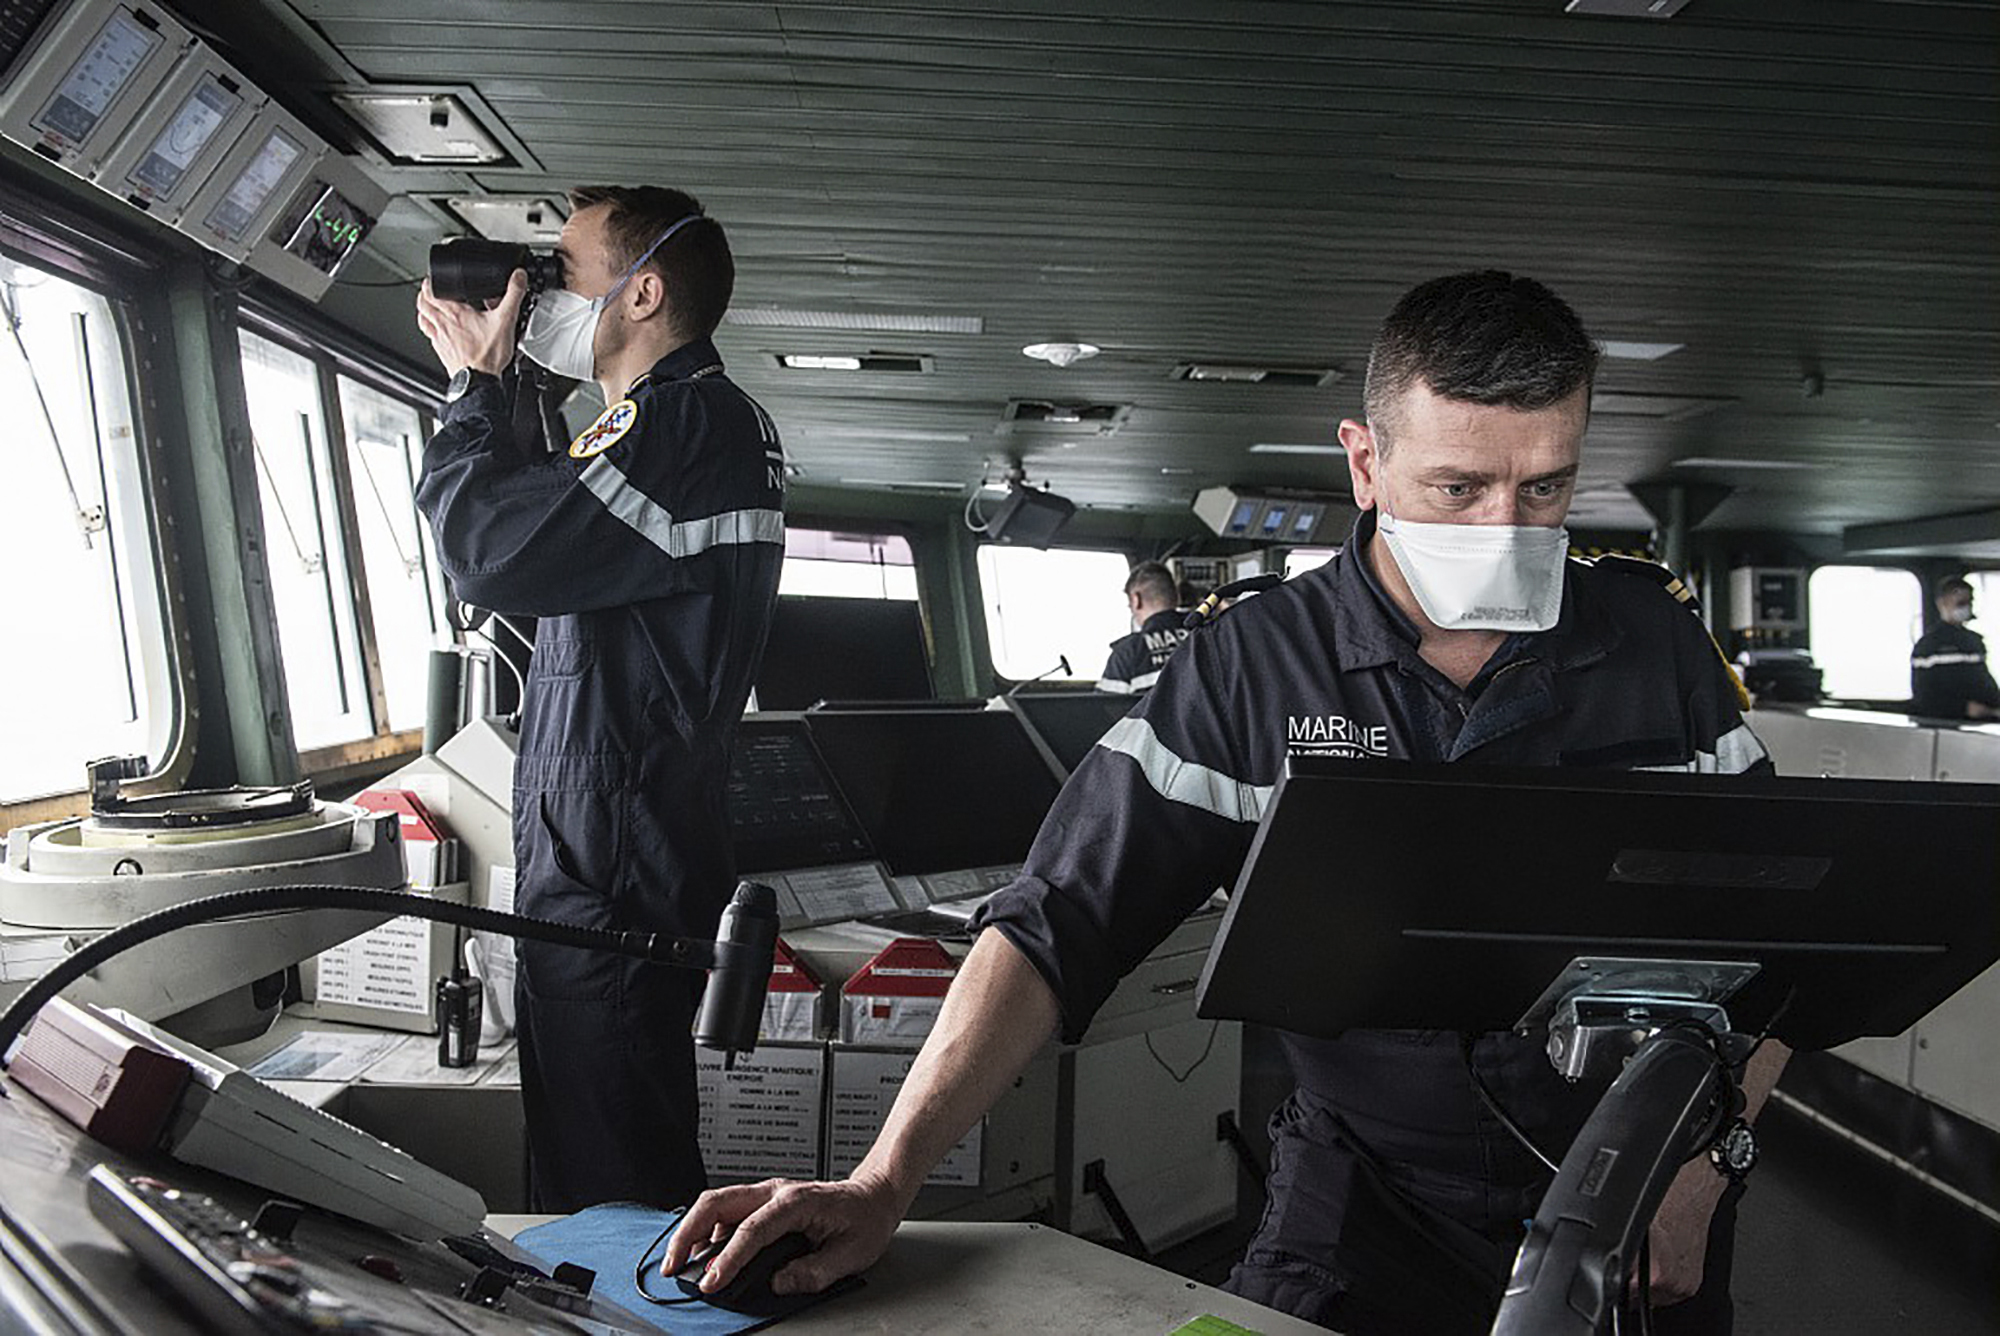 This photo provided on April 10 by the French Navy (Marine Nationale) shows sailors aboard the French aircraft carrier Charles de Gaulle in the Atlantic Ocean on April 8.